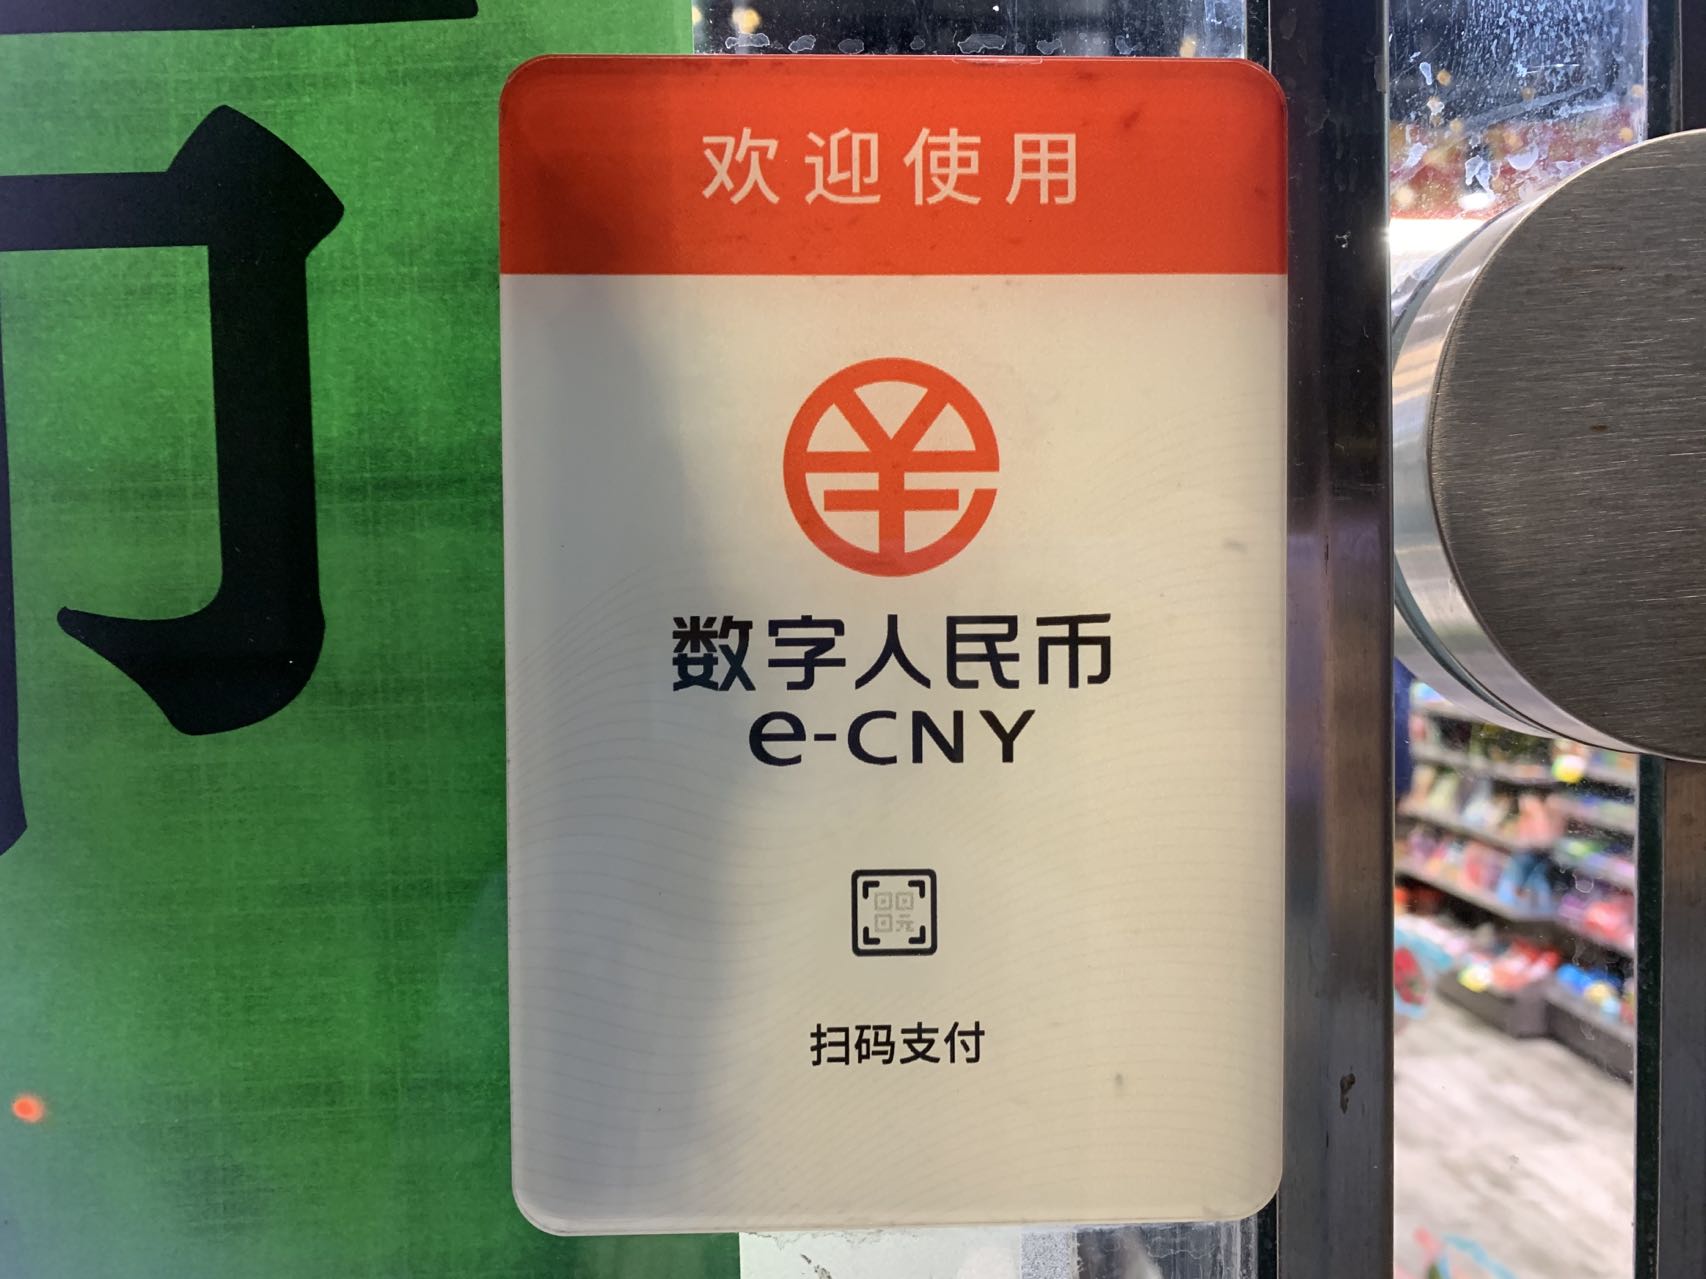 Chinas Cryptocurrency e CNY Is Now Available In Over 23 Cities